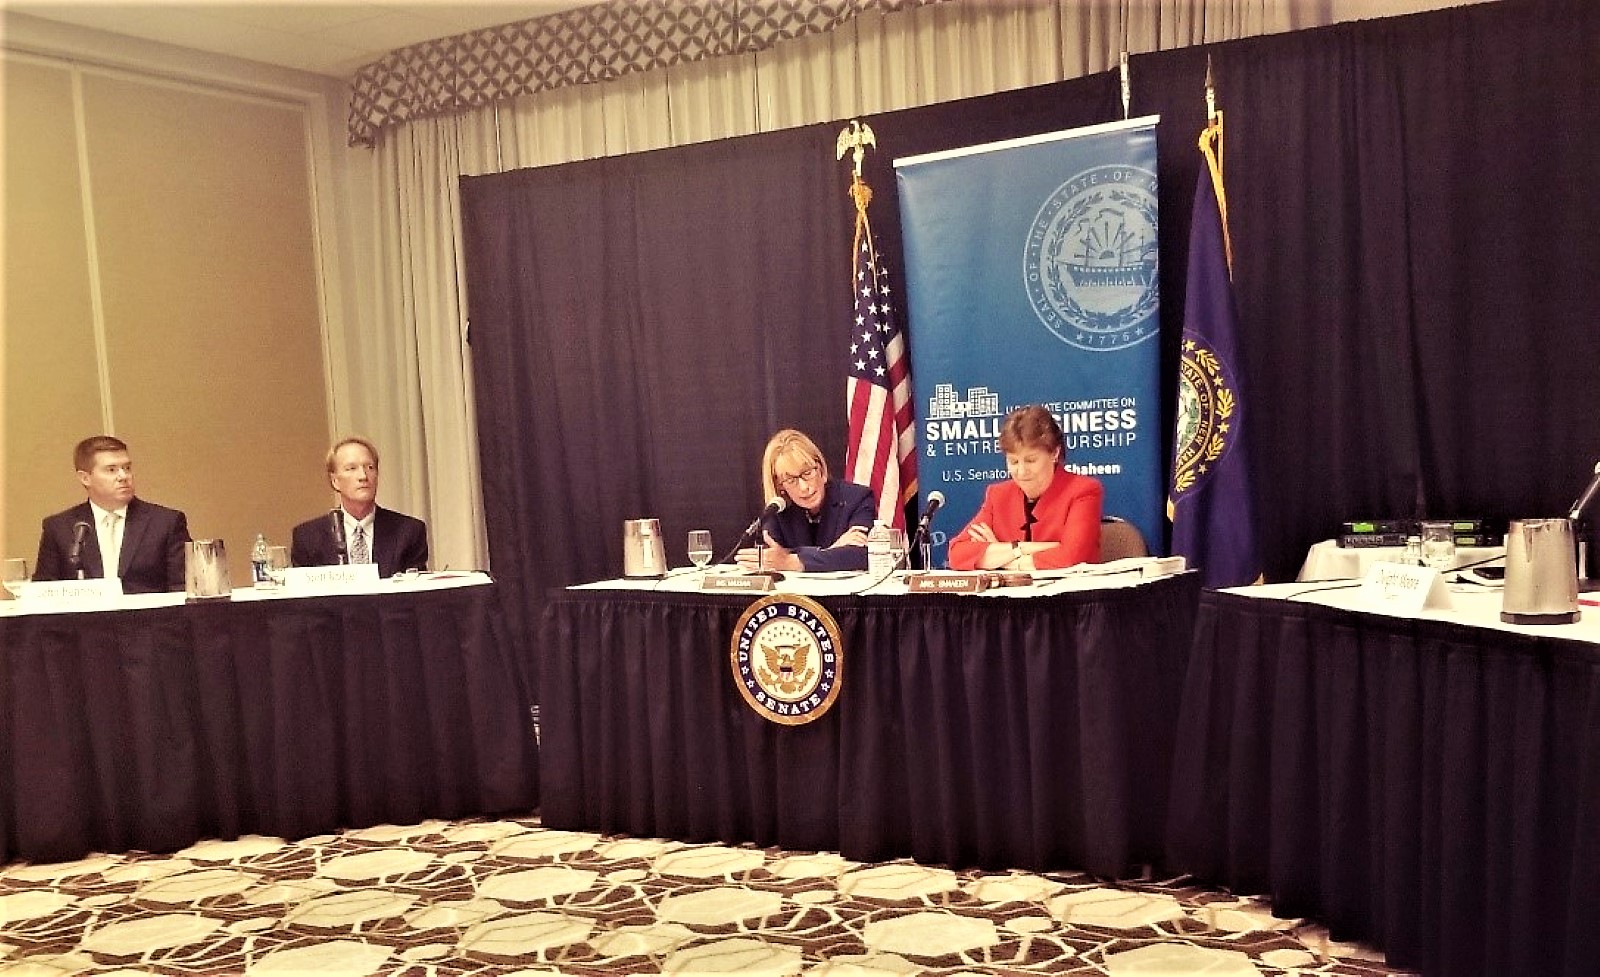 Senators Jeanne Shaheen and Maggie Hassan of New Hampshire participate in a Small Business and Entrepreneurship Committee field hearing.